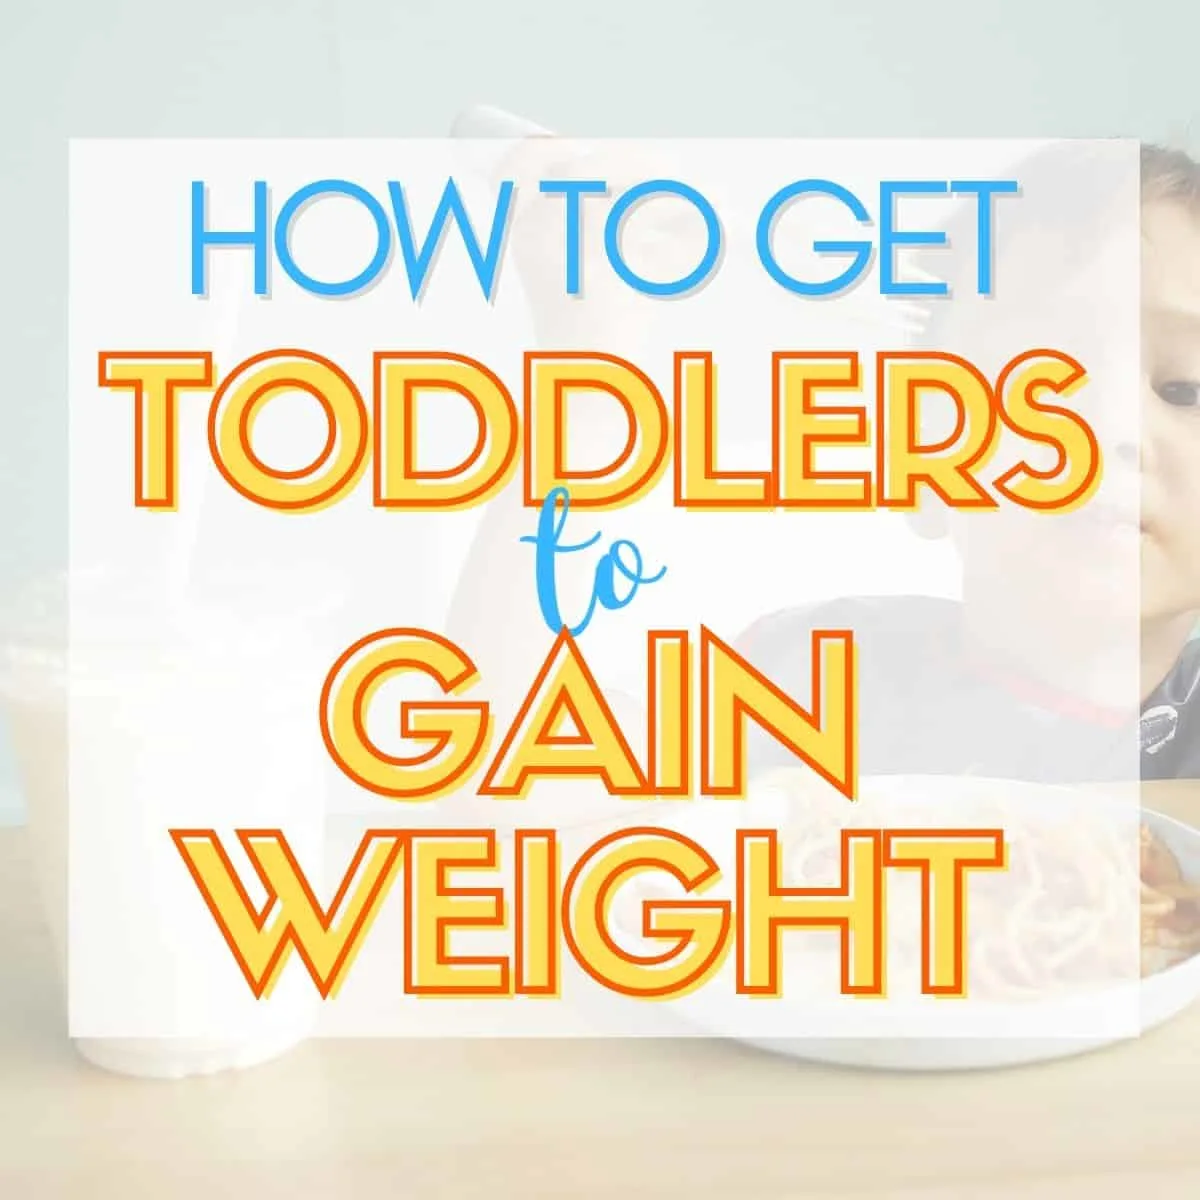 Graphic of tips for weight gain for toddlers.